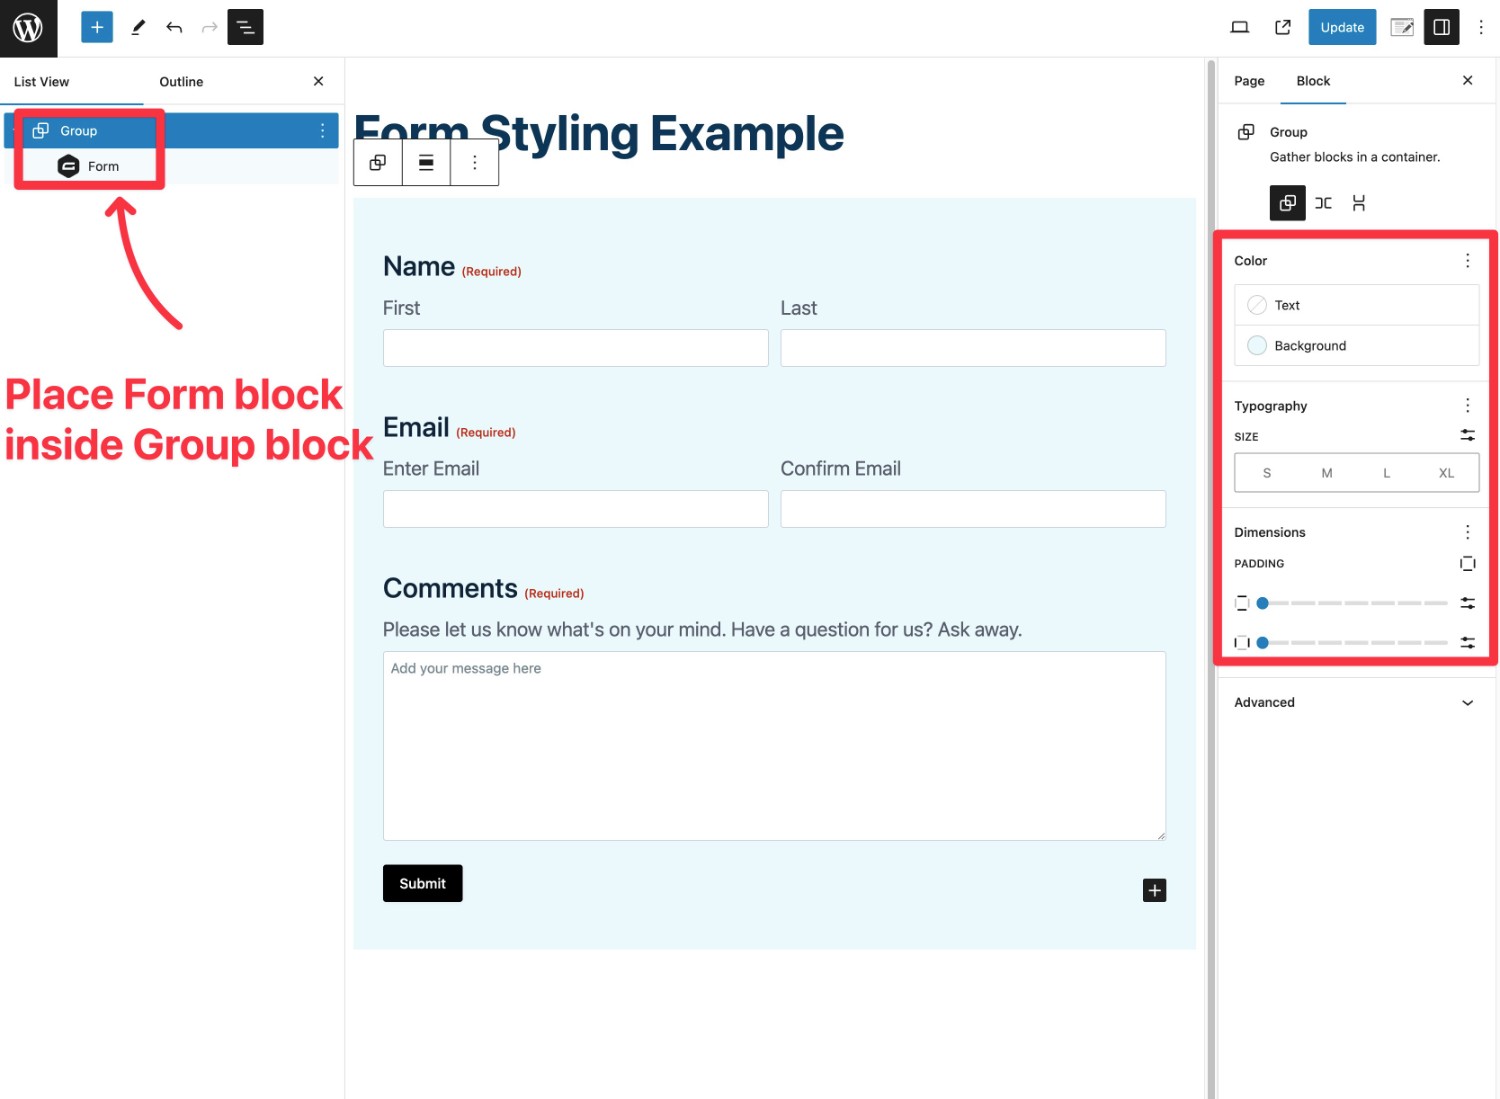 Use the Group block to style your form even more